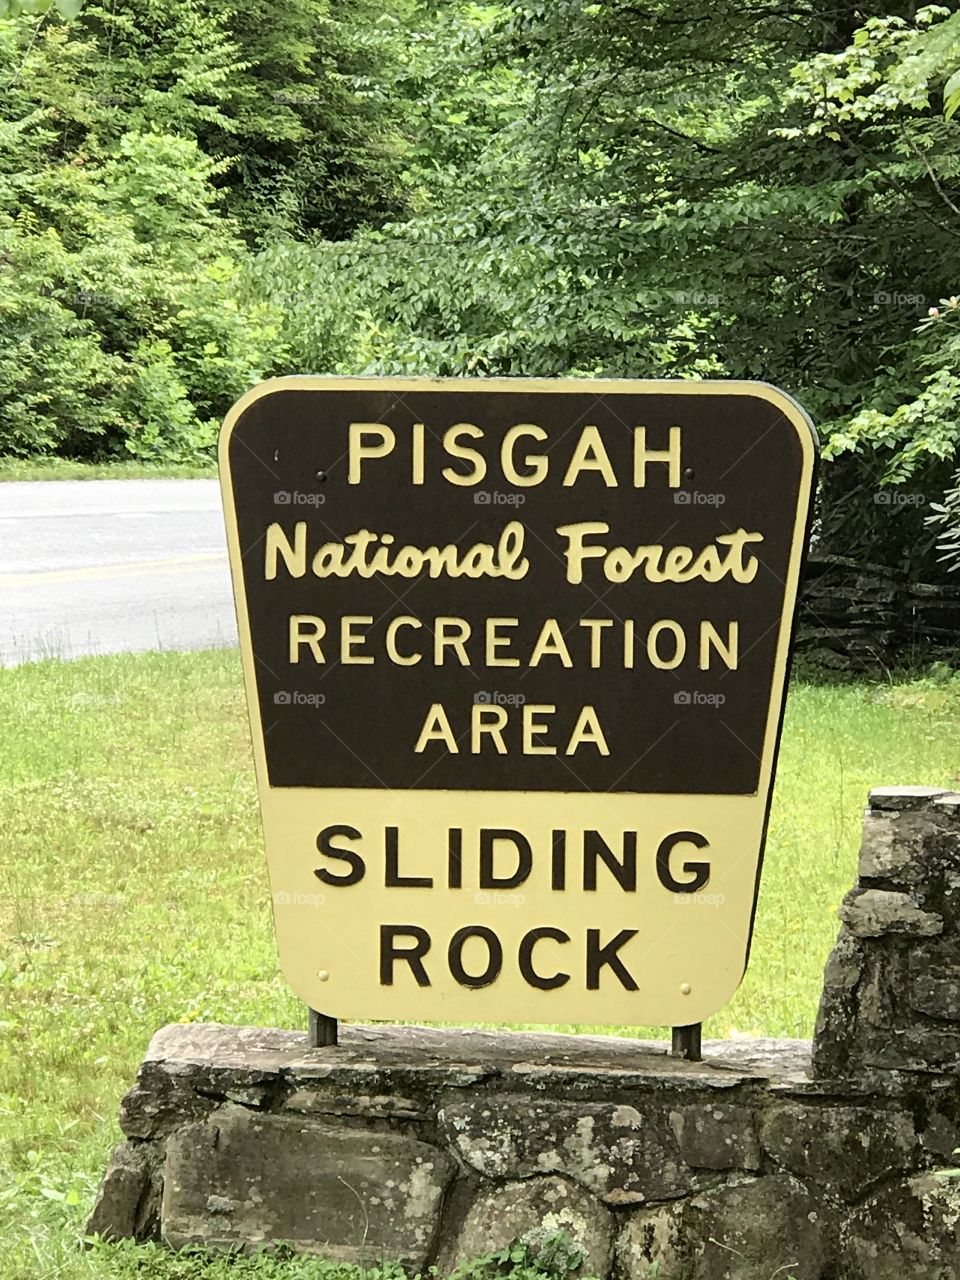 Pisgah National Forest 